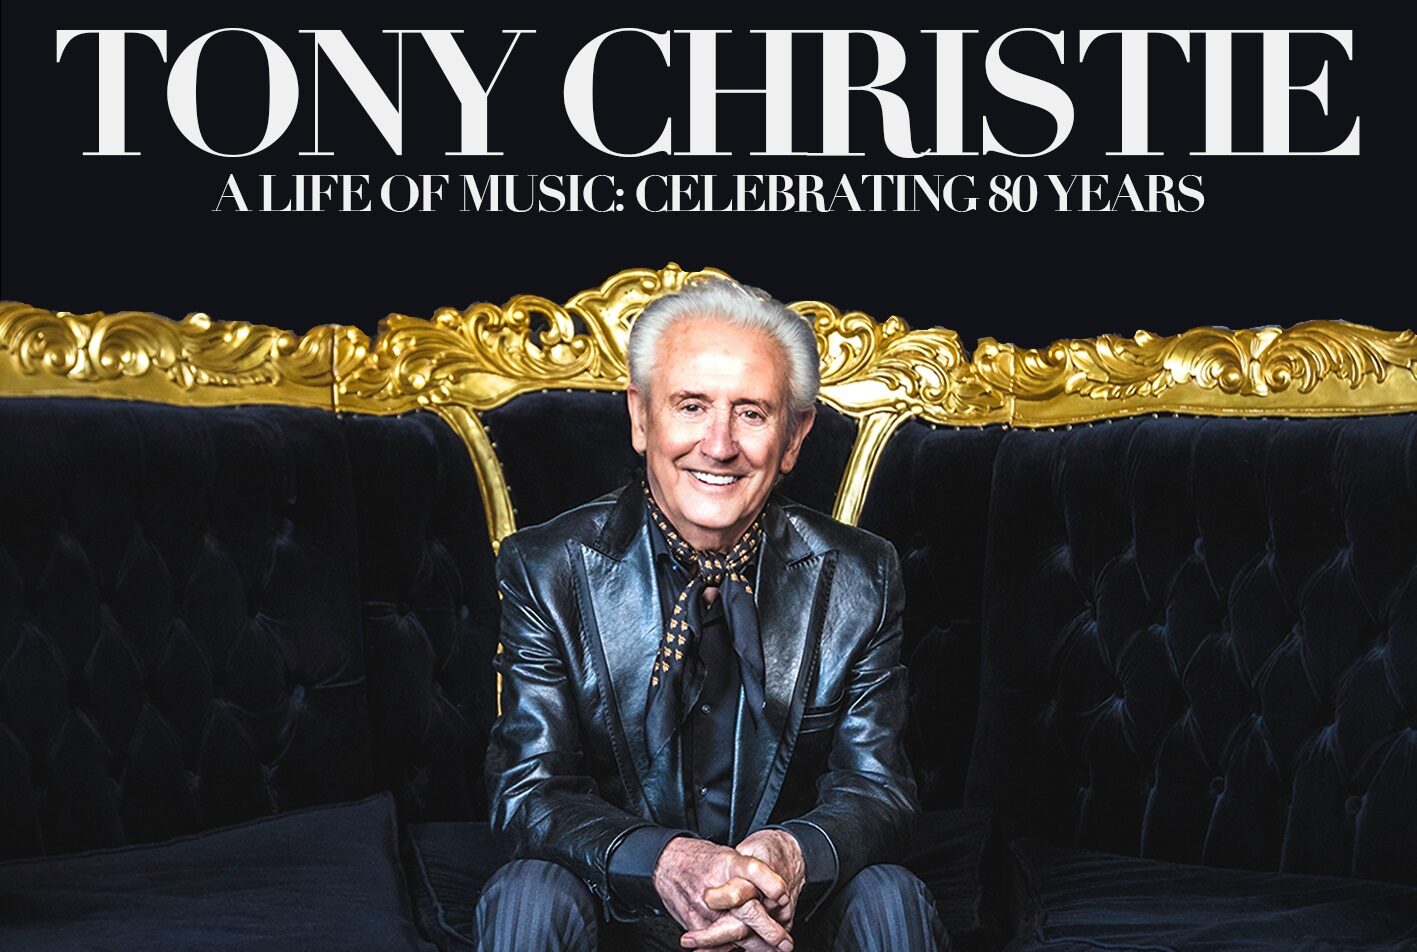 Tony Christie – A Life of Music: Celebrating 80 Years